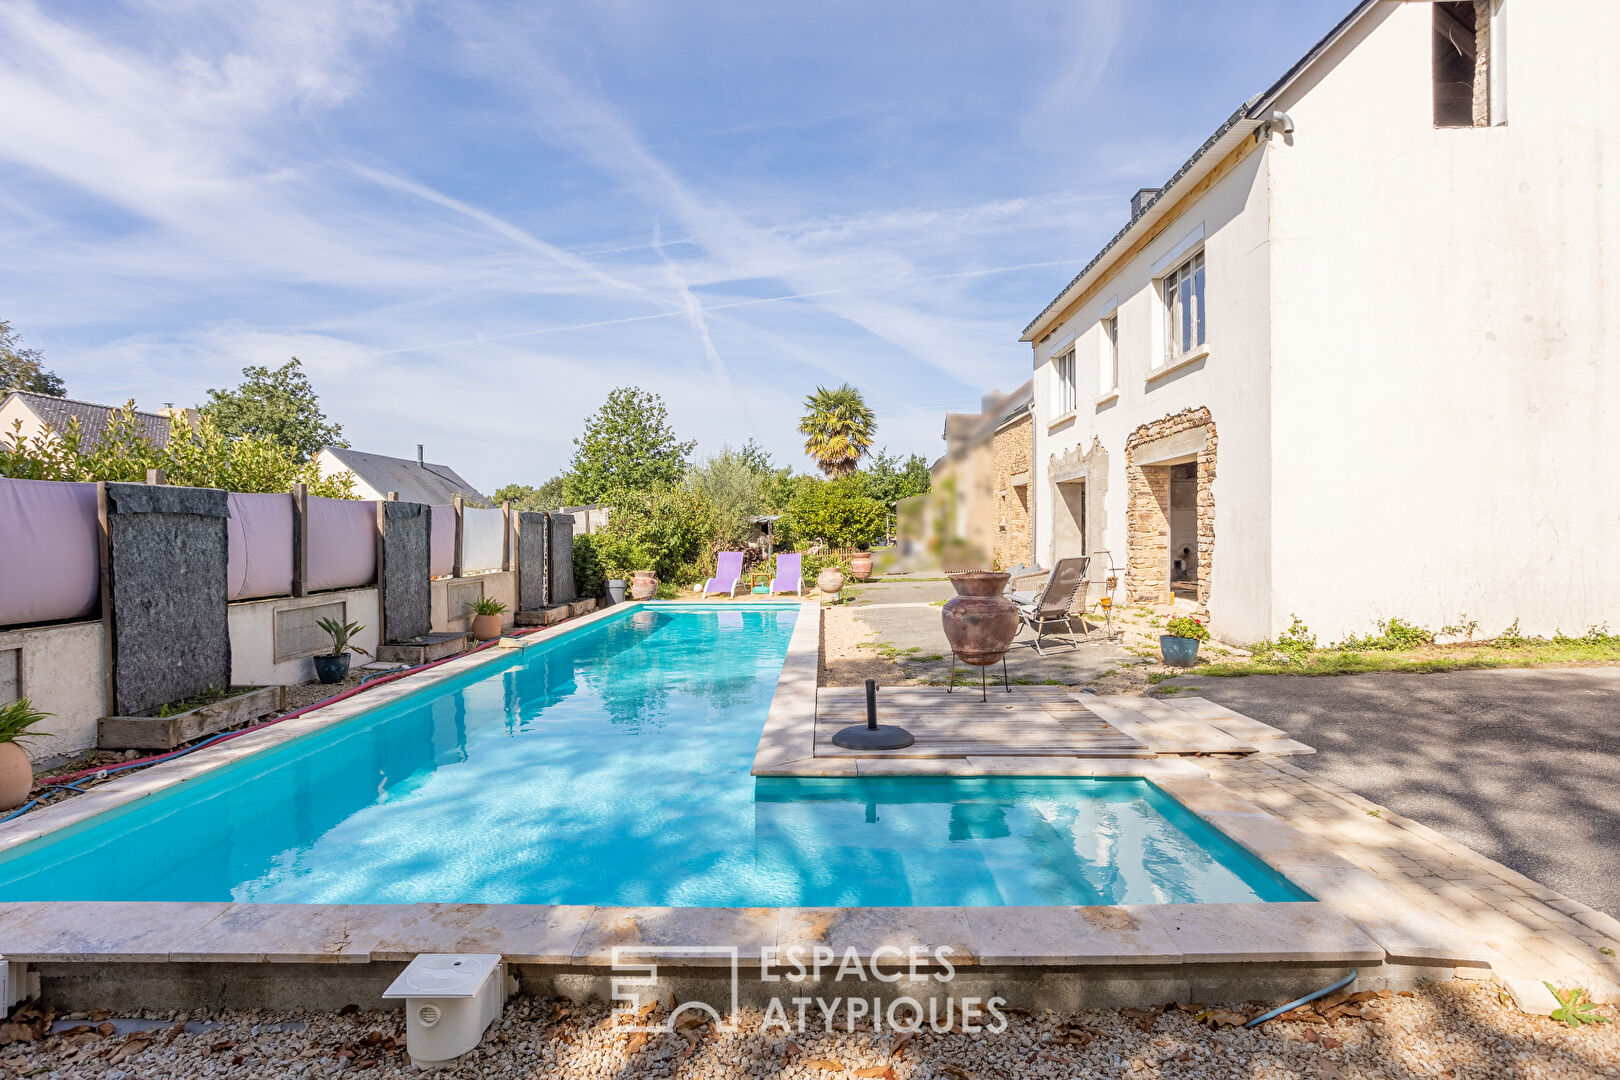 Bright stone farmhouse with swimming pool